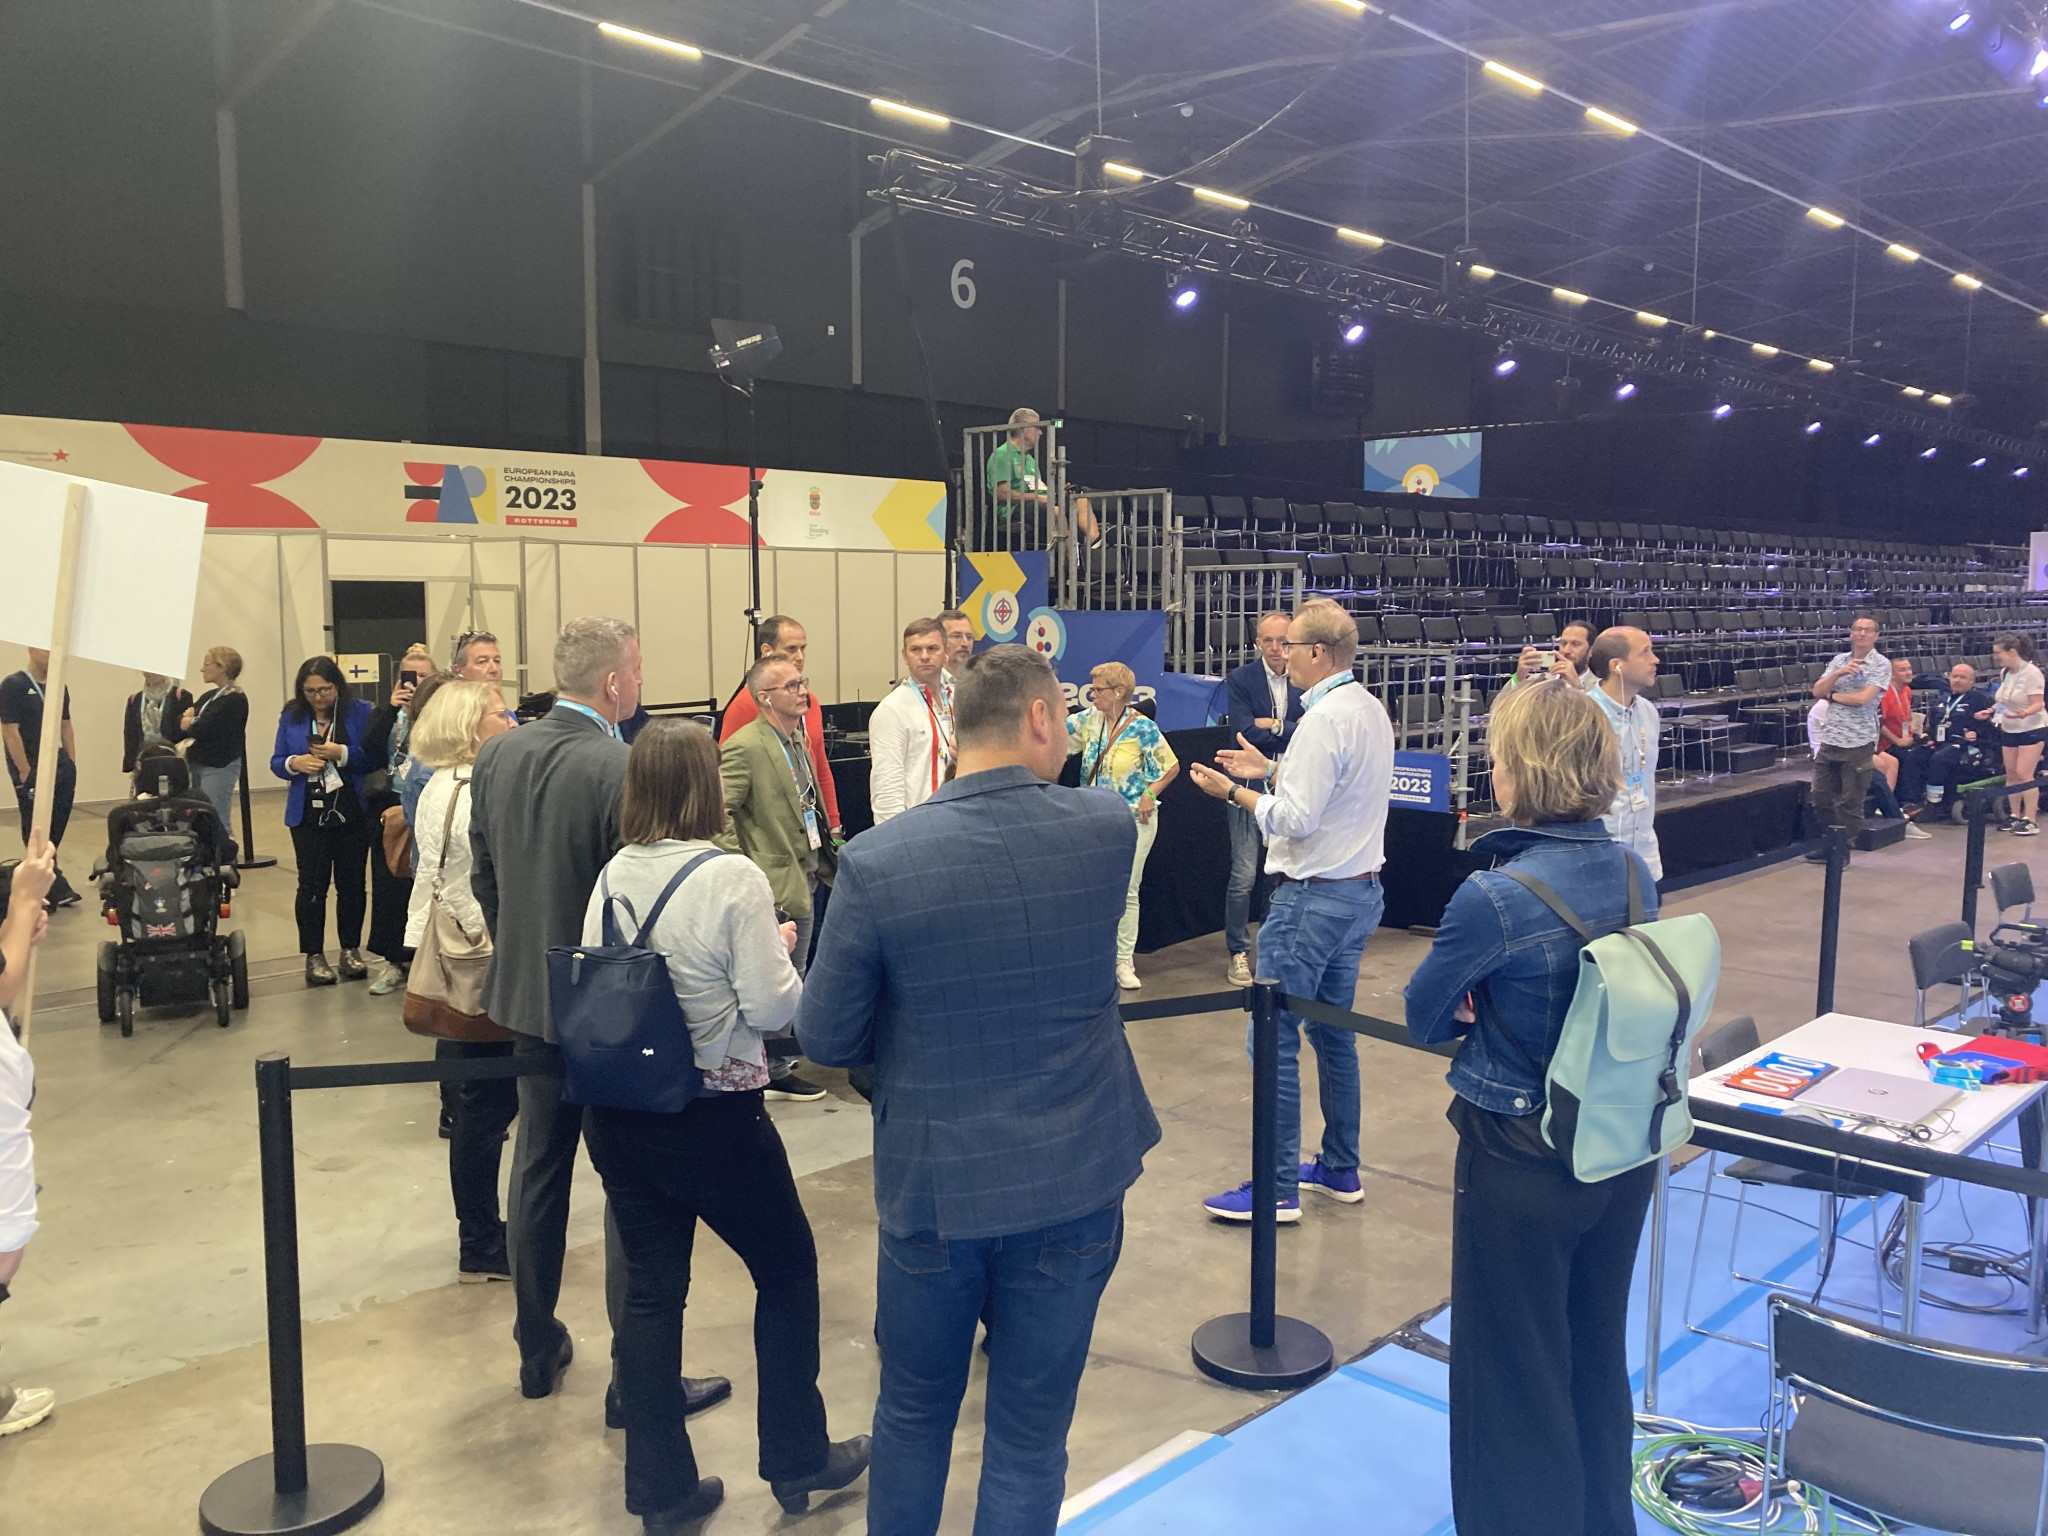 Observer programme participants were informed about what is it required to stage the European Para Championships with Rotterdam holding the first edition ©ITG